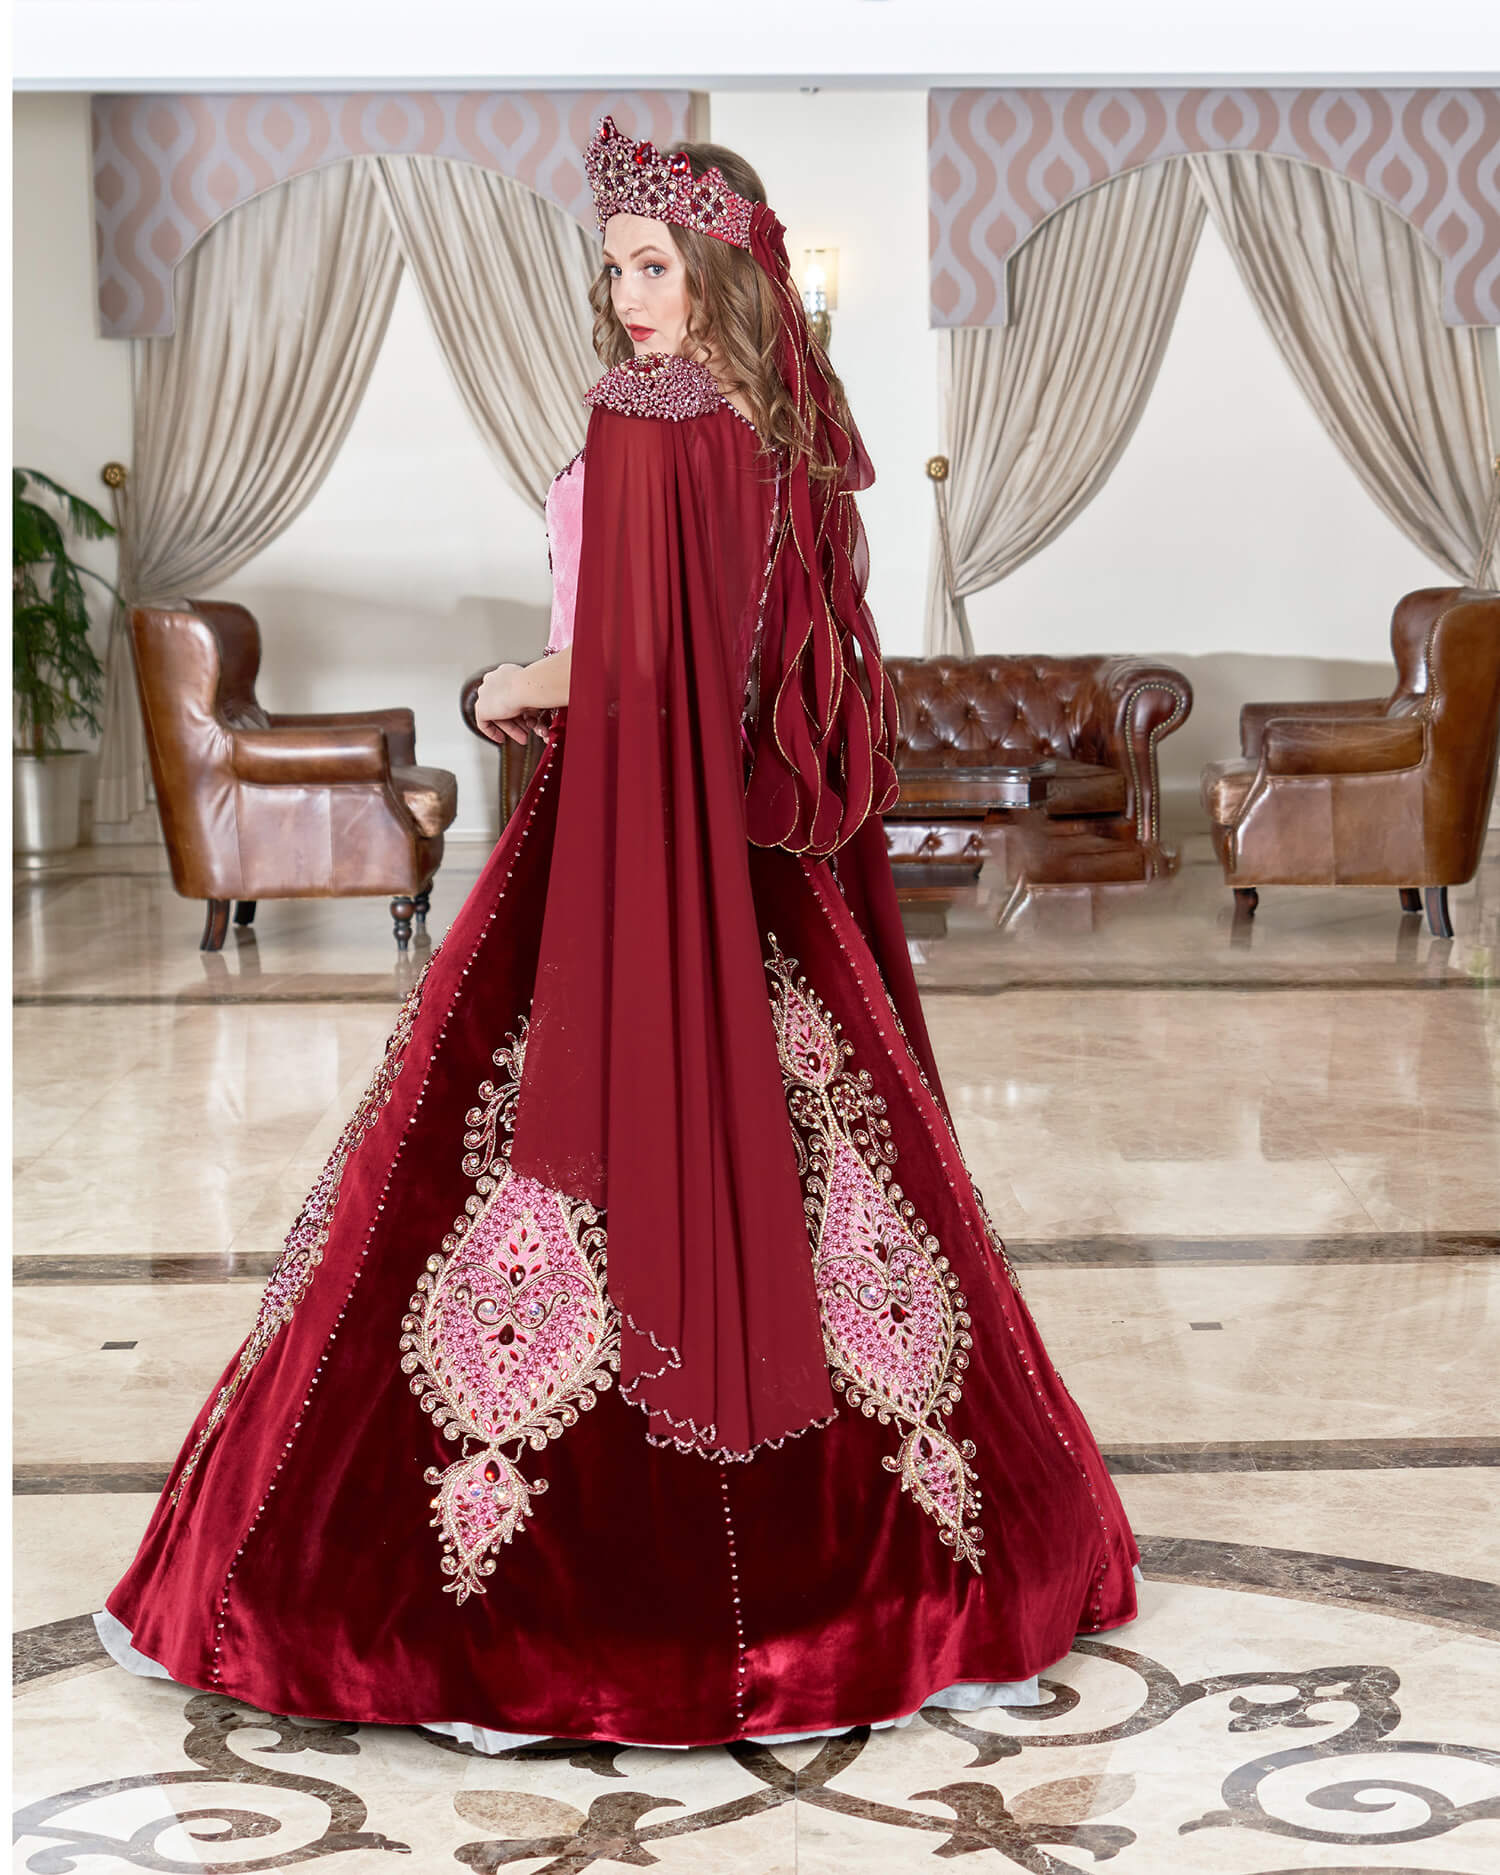 Claret Red Henna Dress with Cape